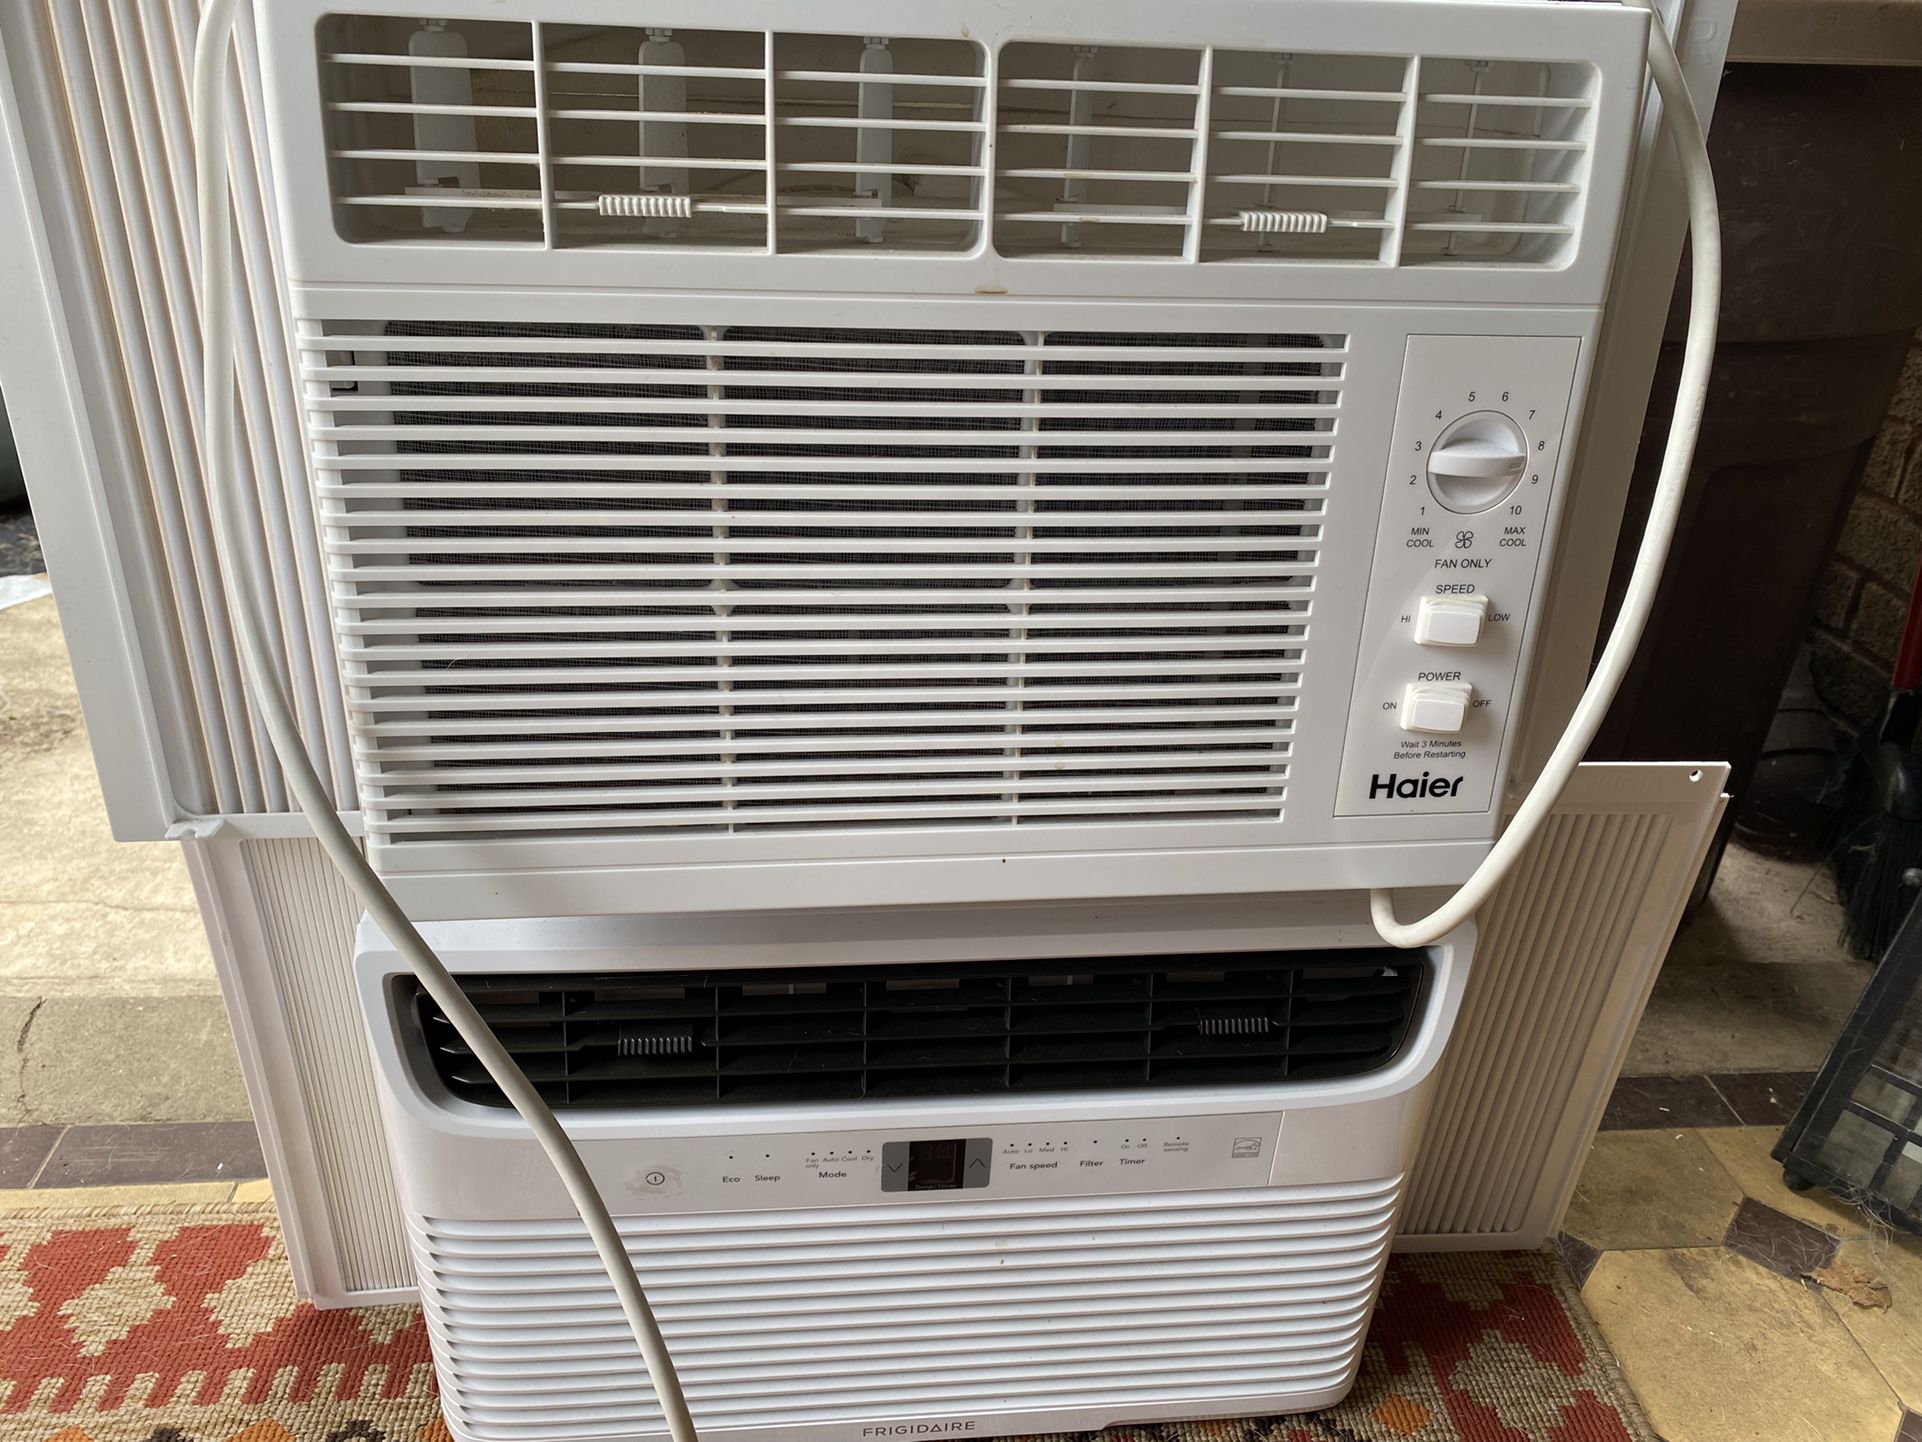 Air Conditioning Units For Windows